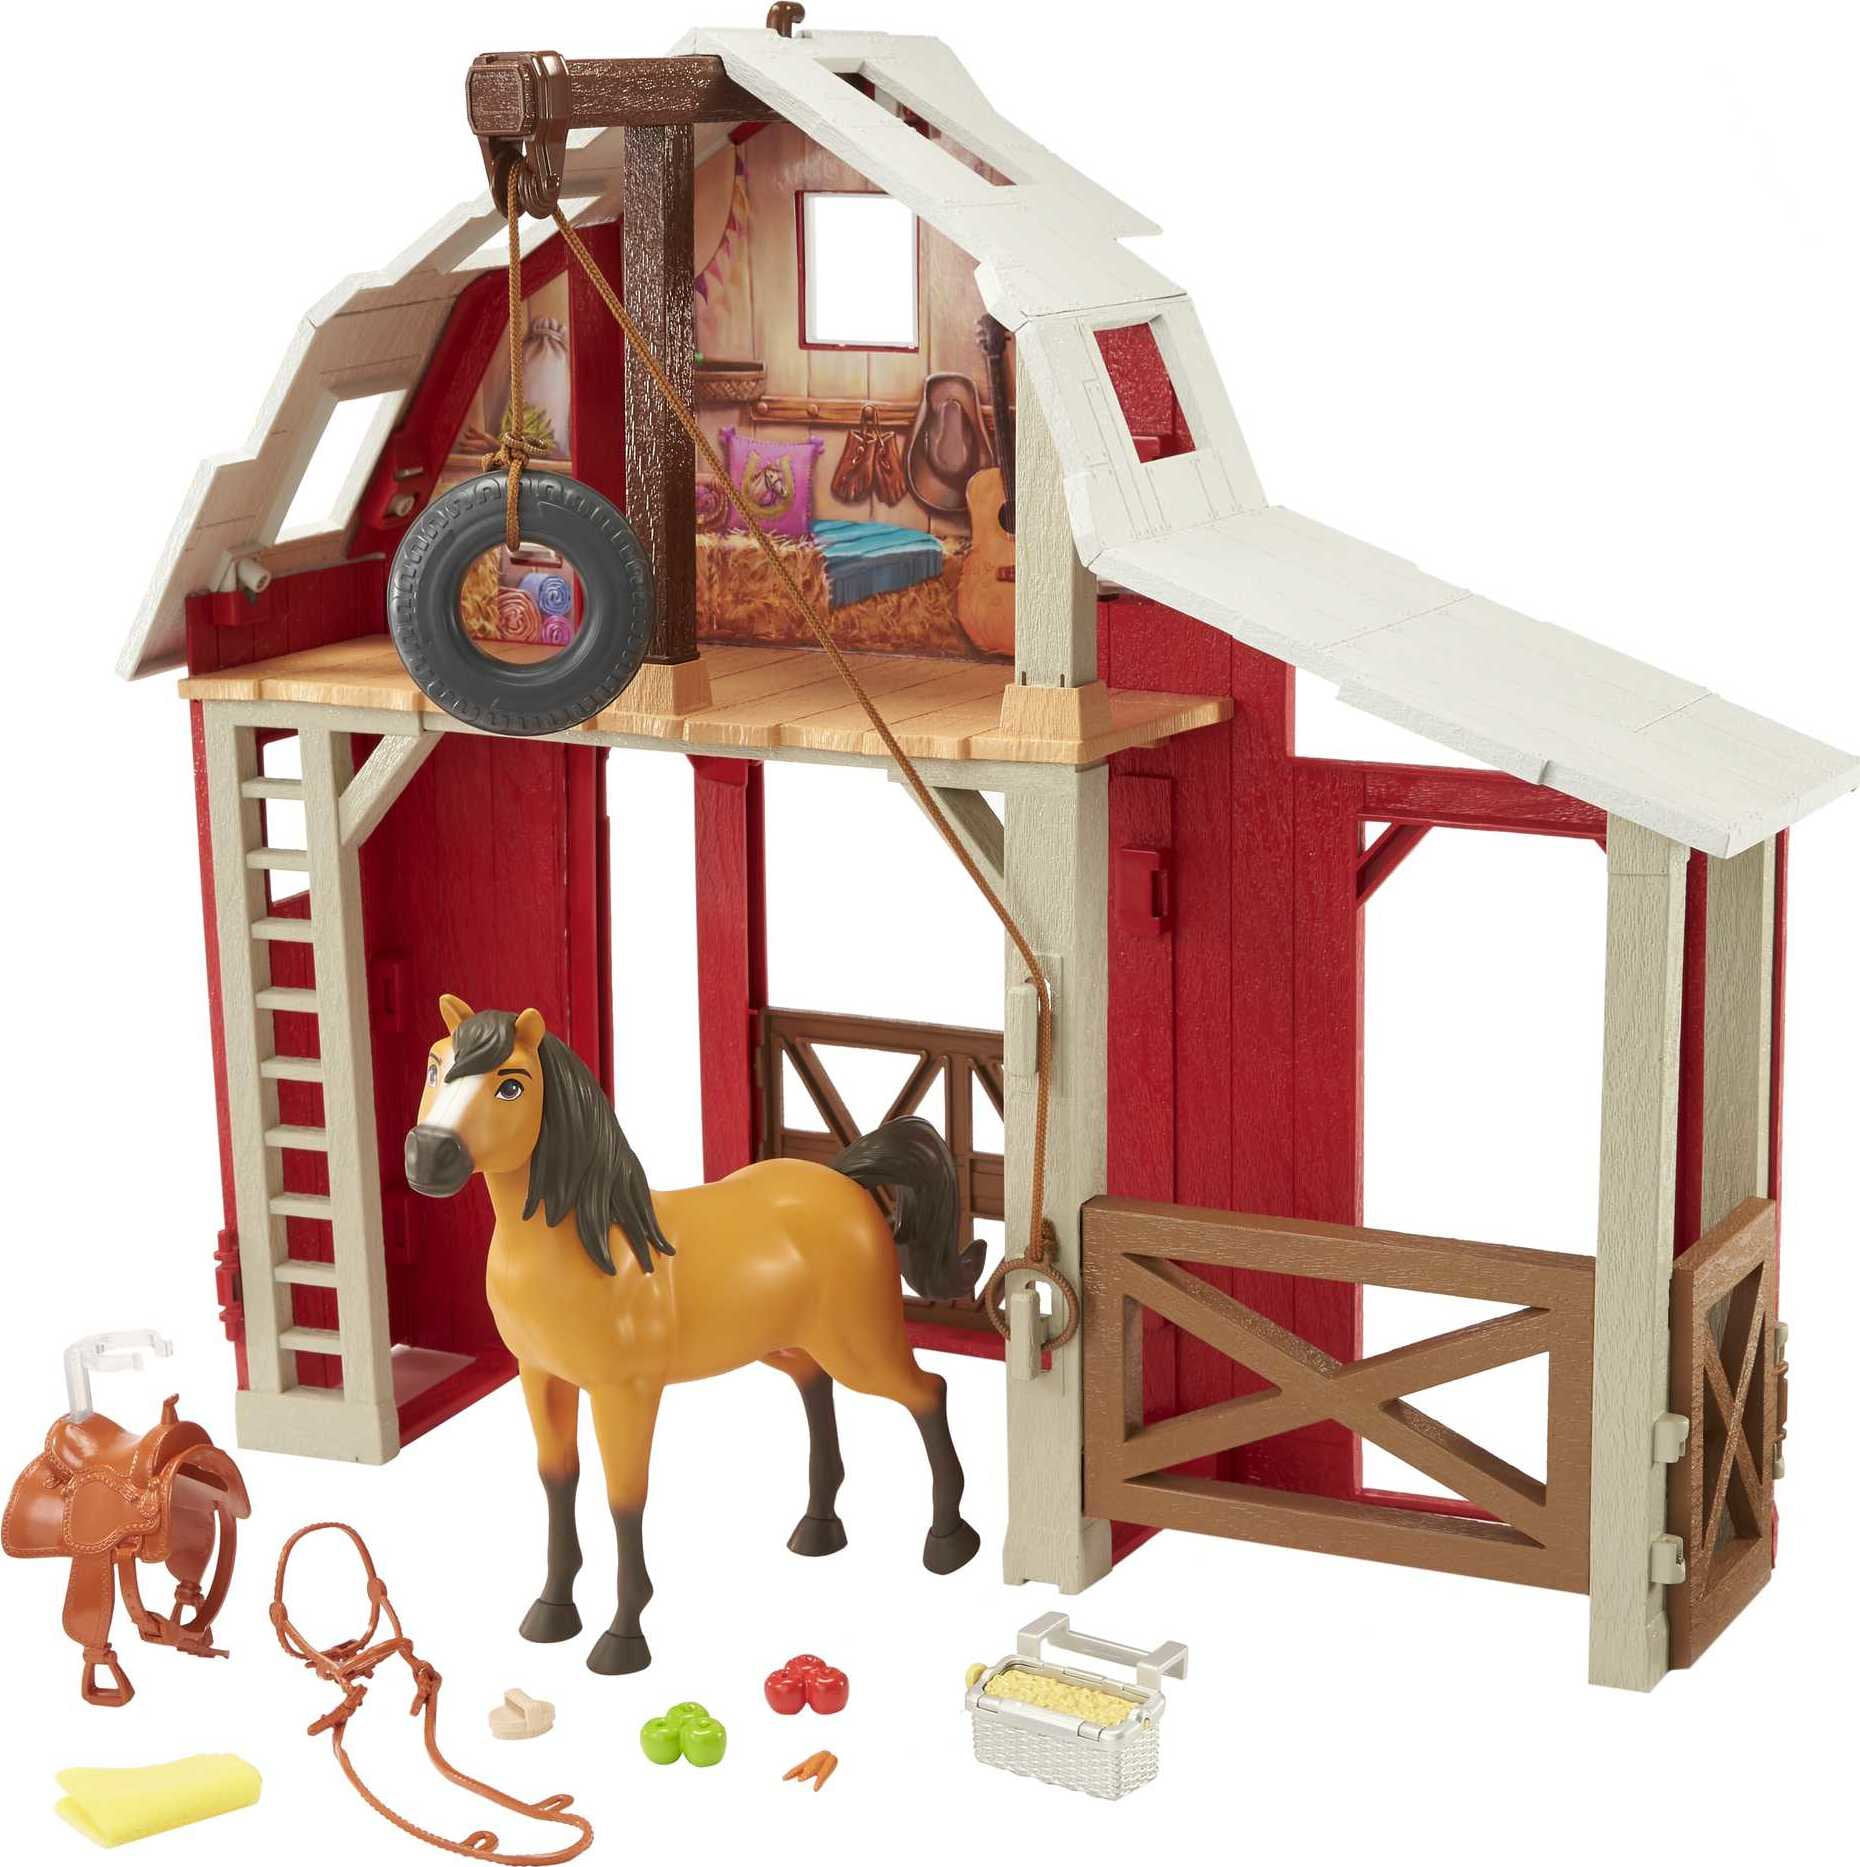 Kids Horse Barn Stable Building Toy Play Set Toddler Pretend Gift Boy Girl New 